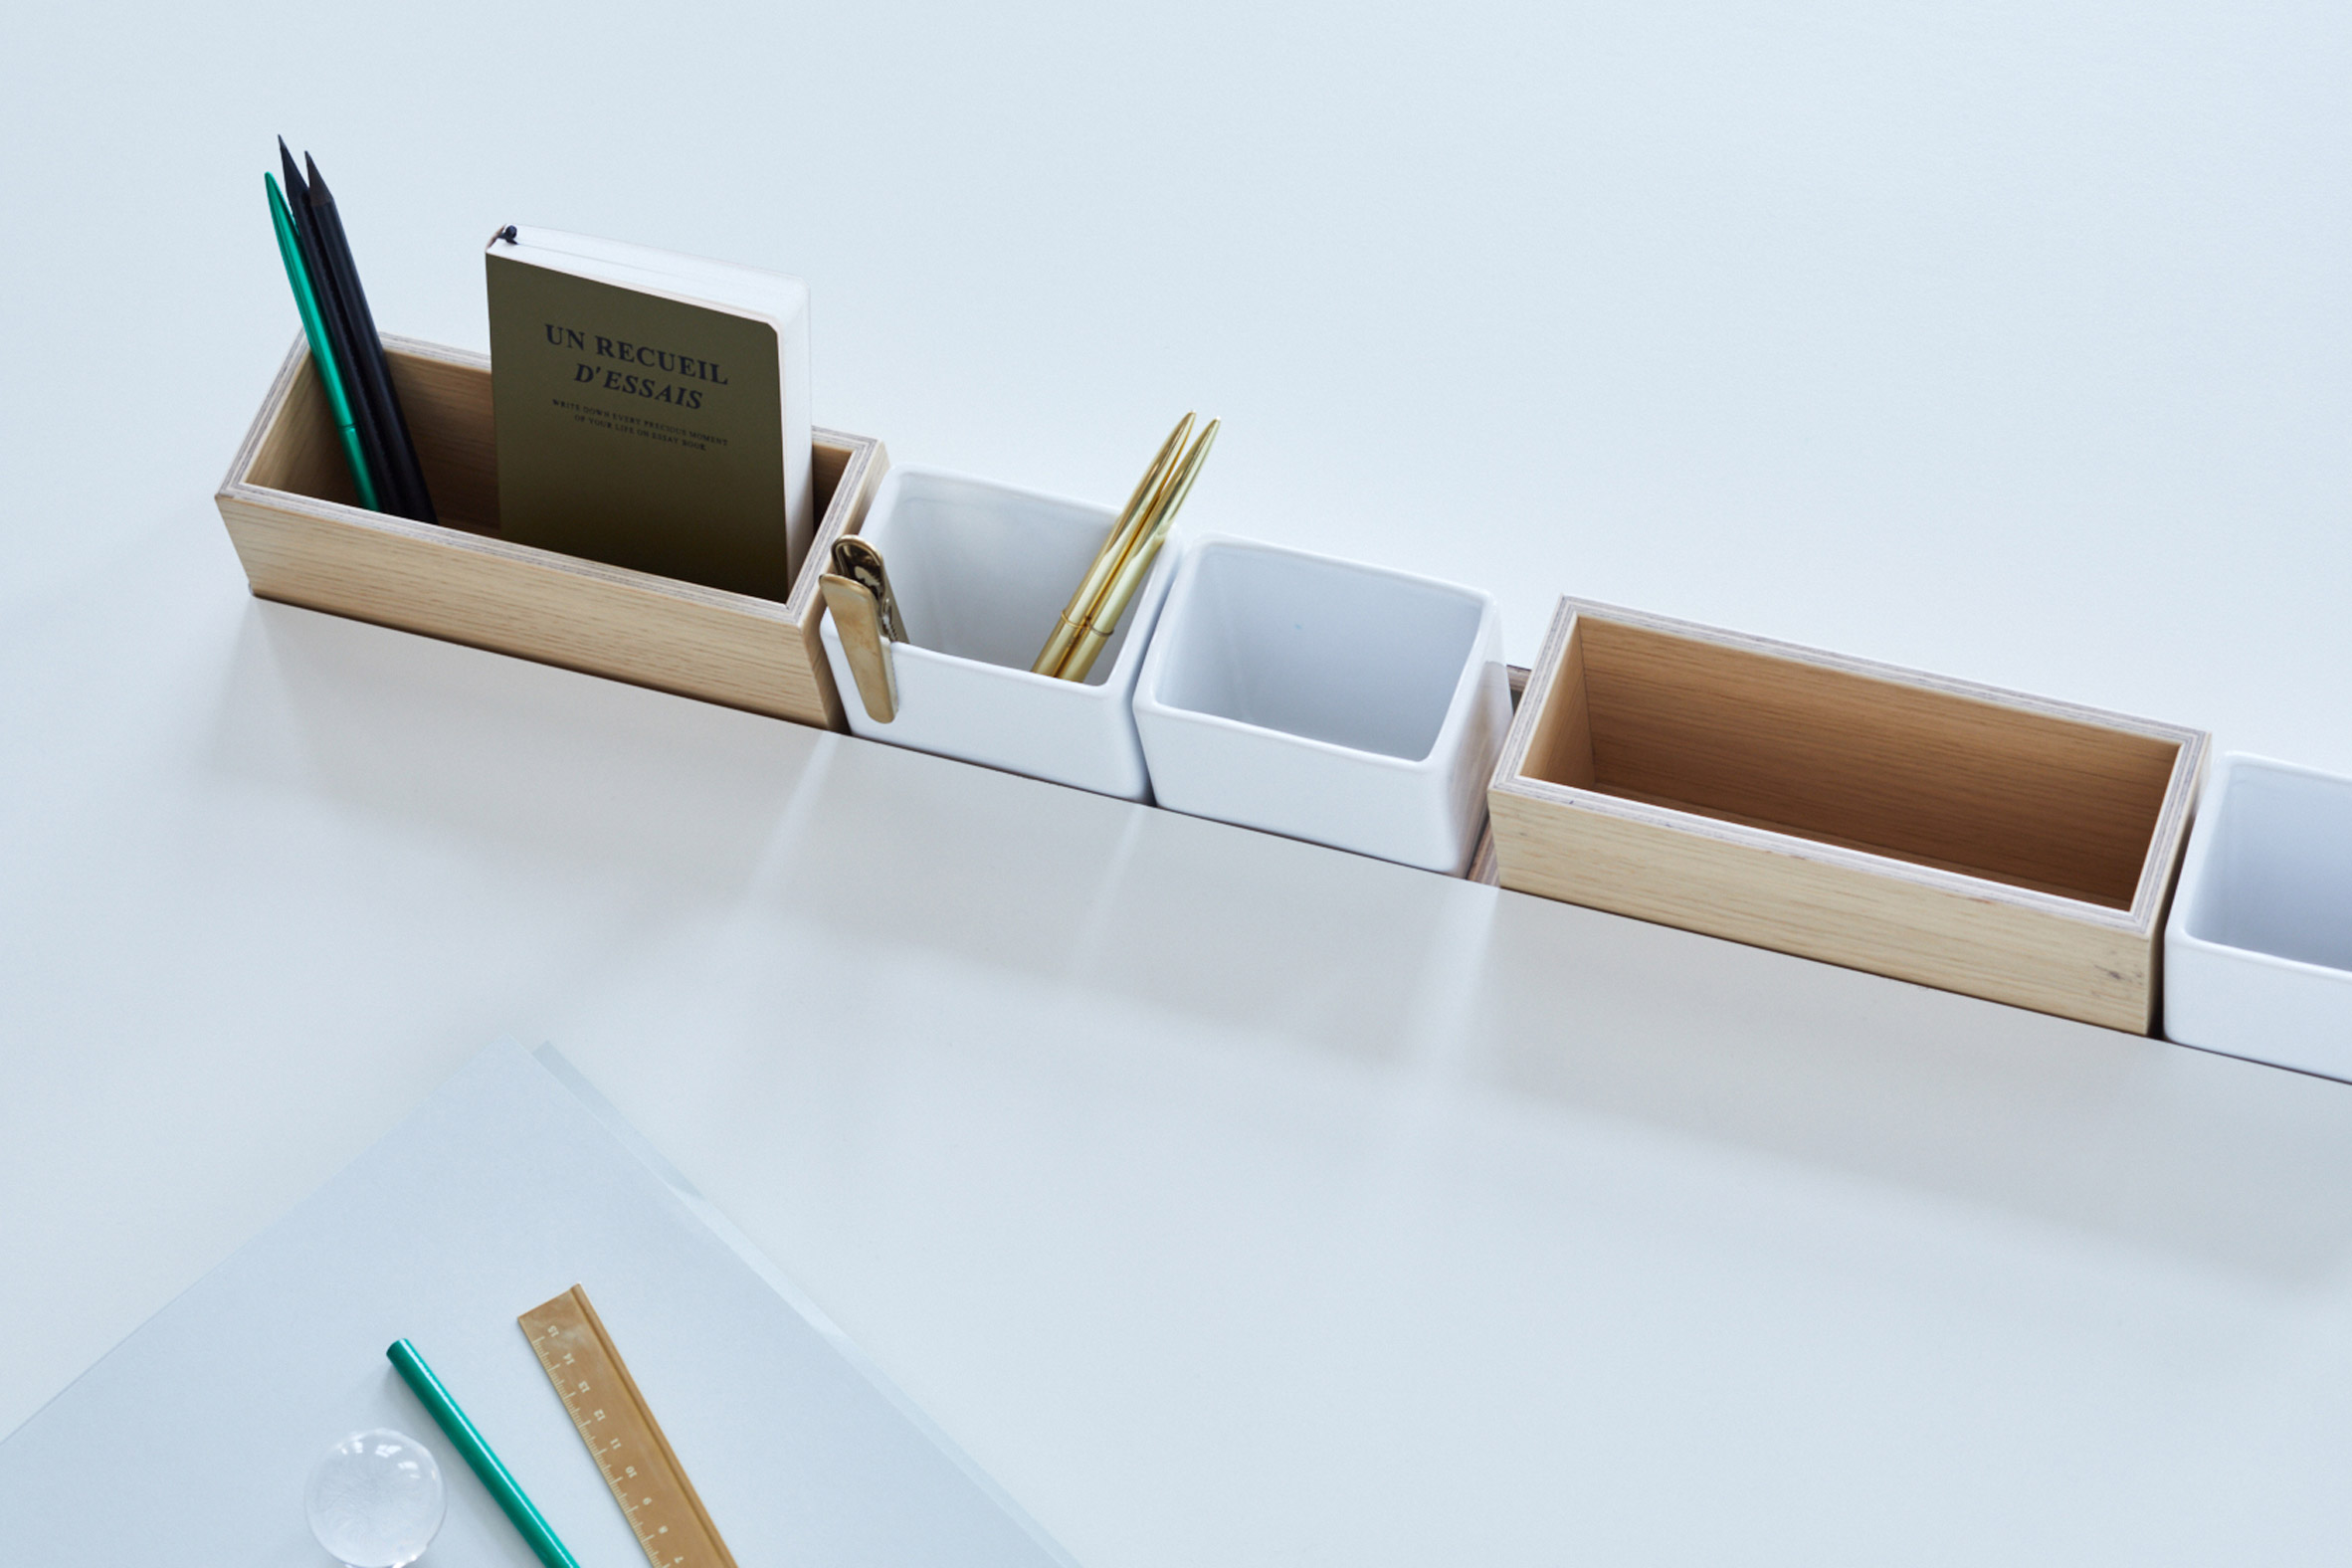 Bene's modular workplace system is designed for freelancers-16